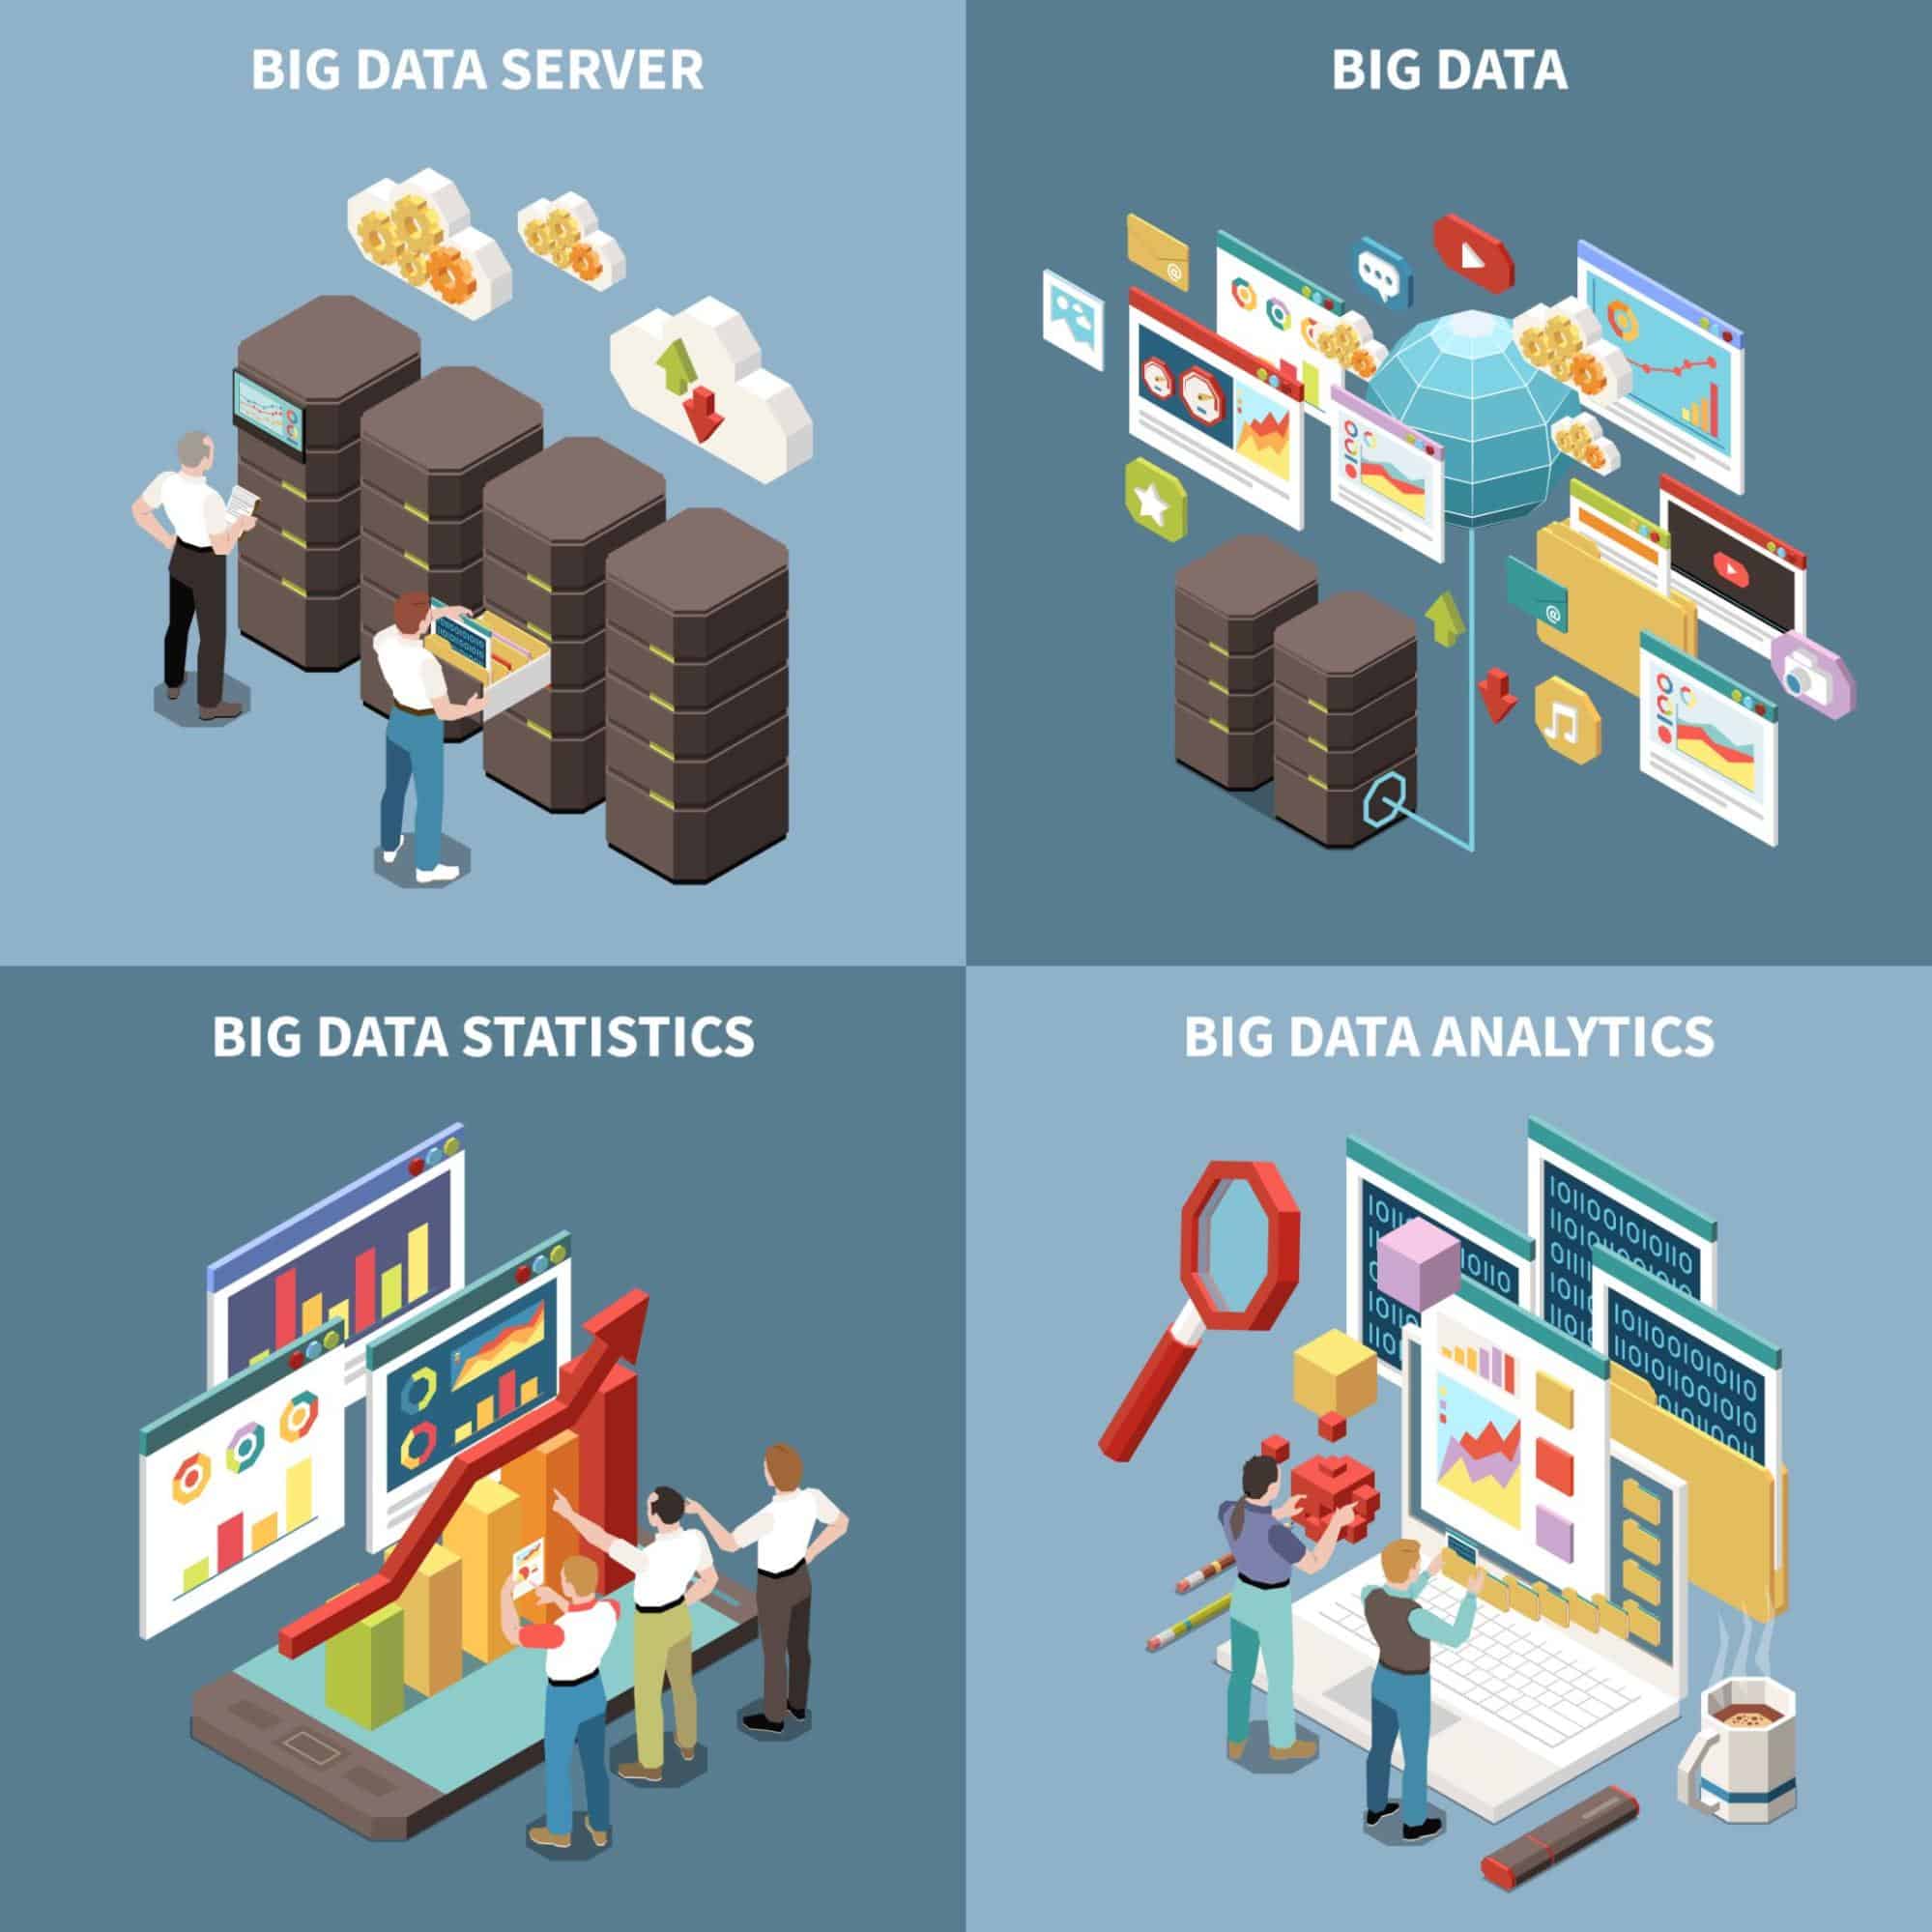 Differences Between The Two Big Data Frameworks